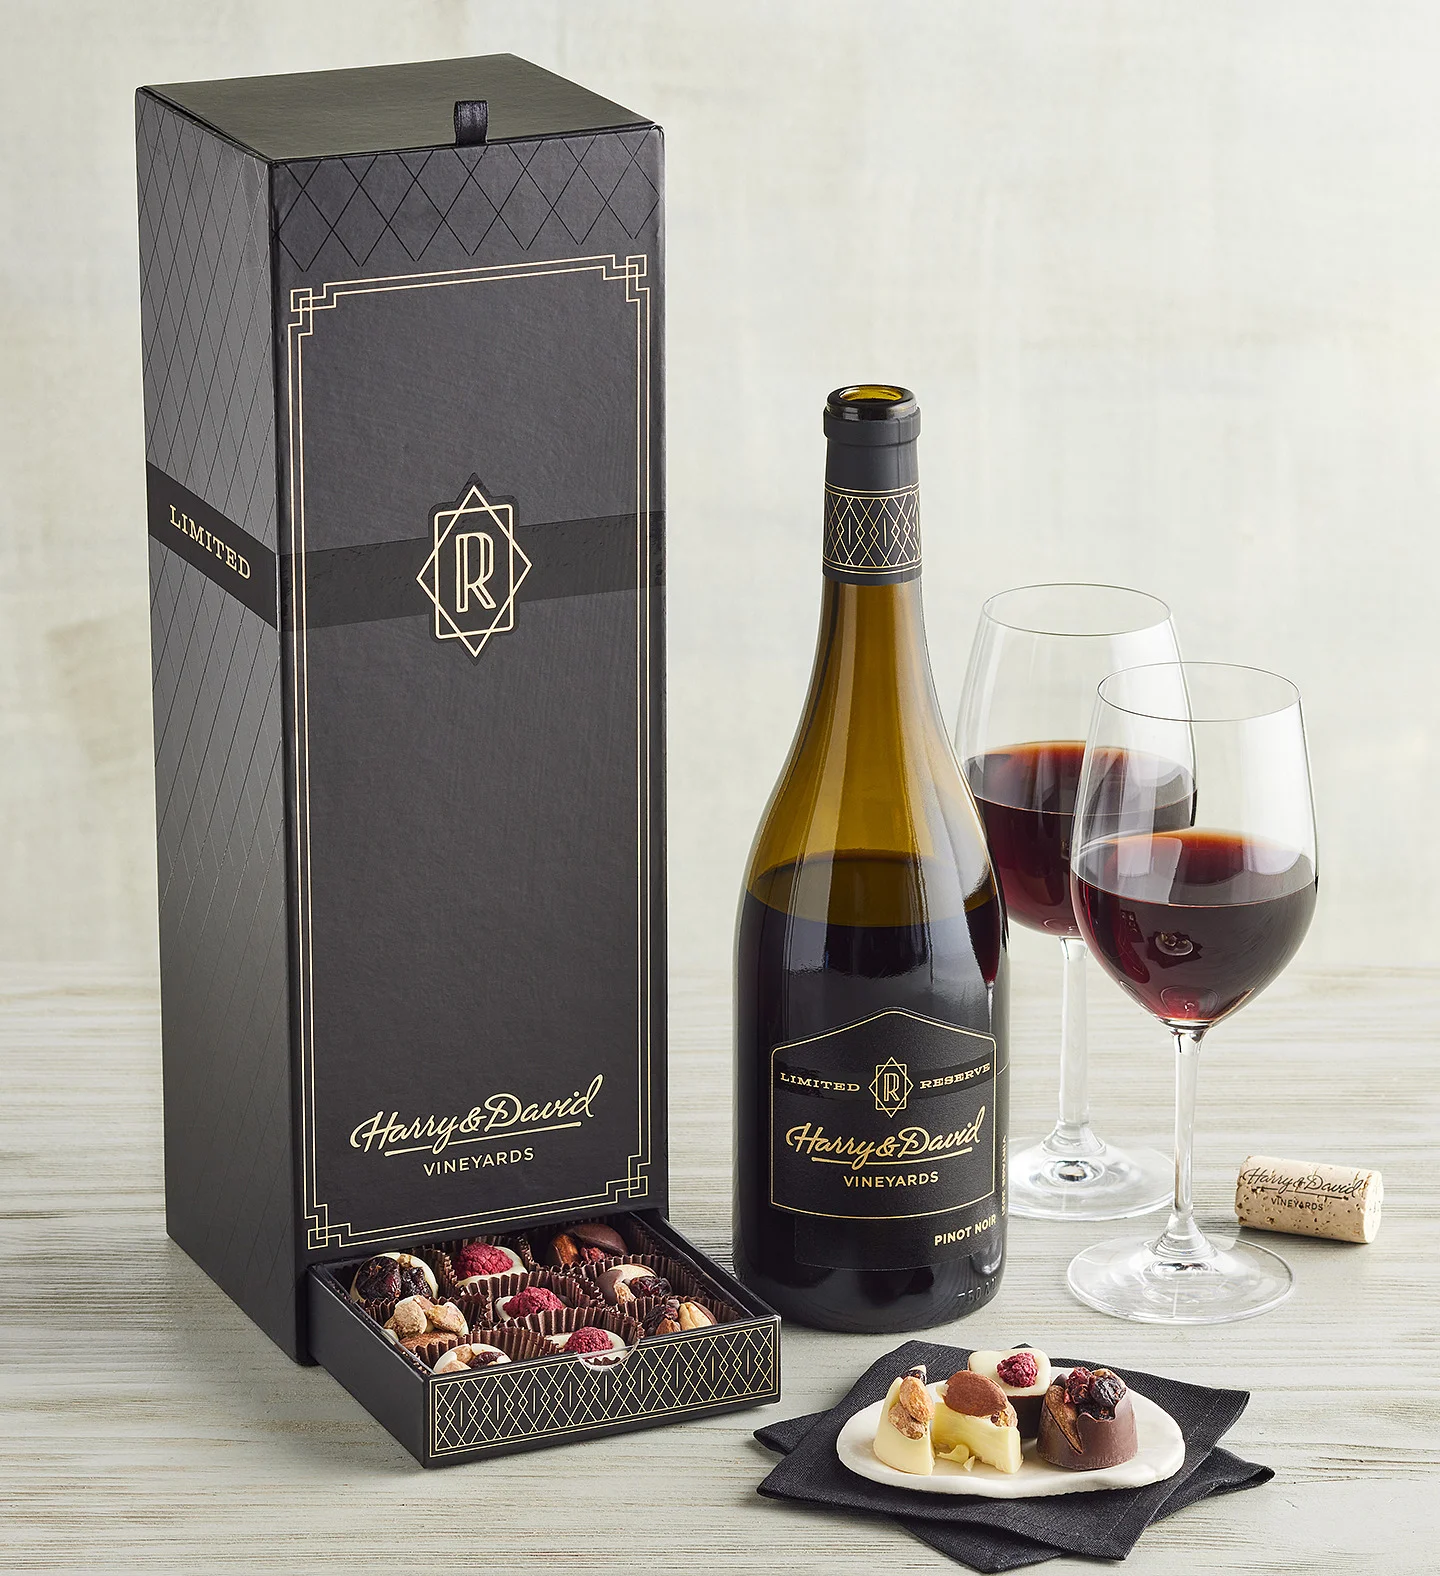 father in law gifts Reserve Pinot Noir and Artisan Belgian Chocolate